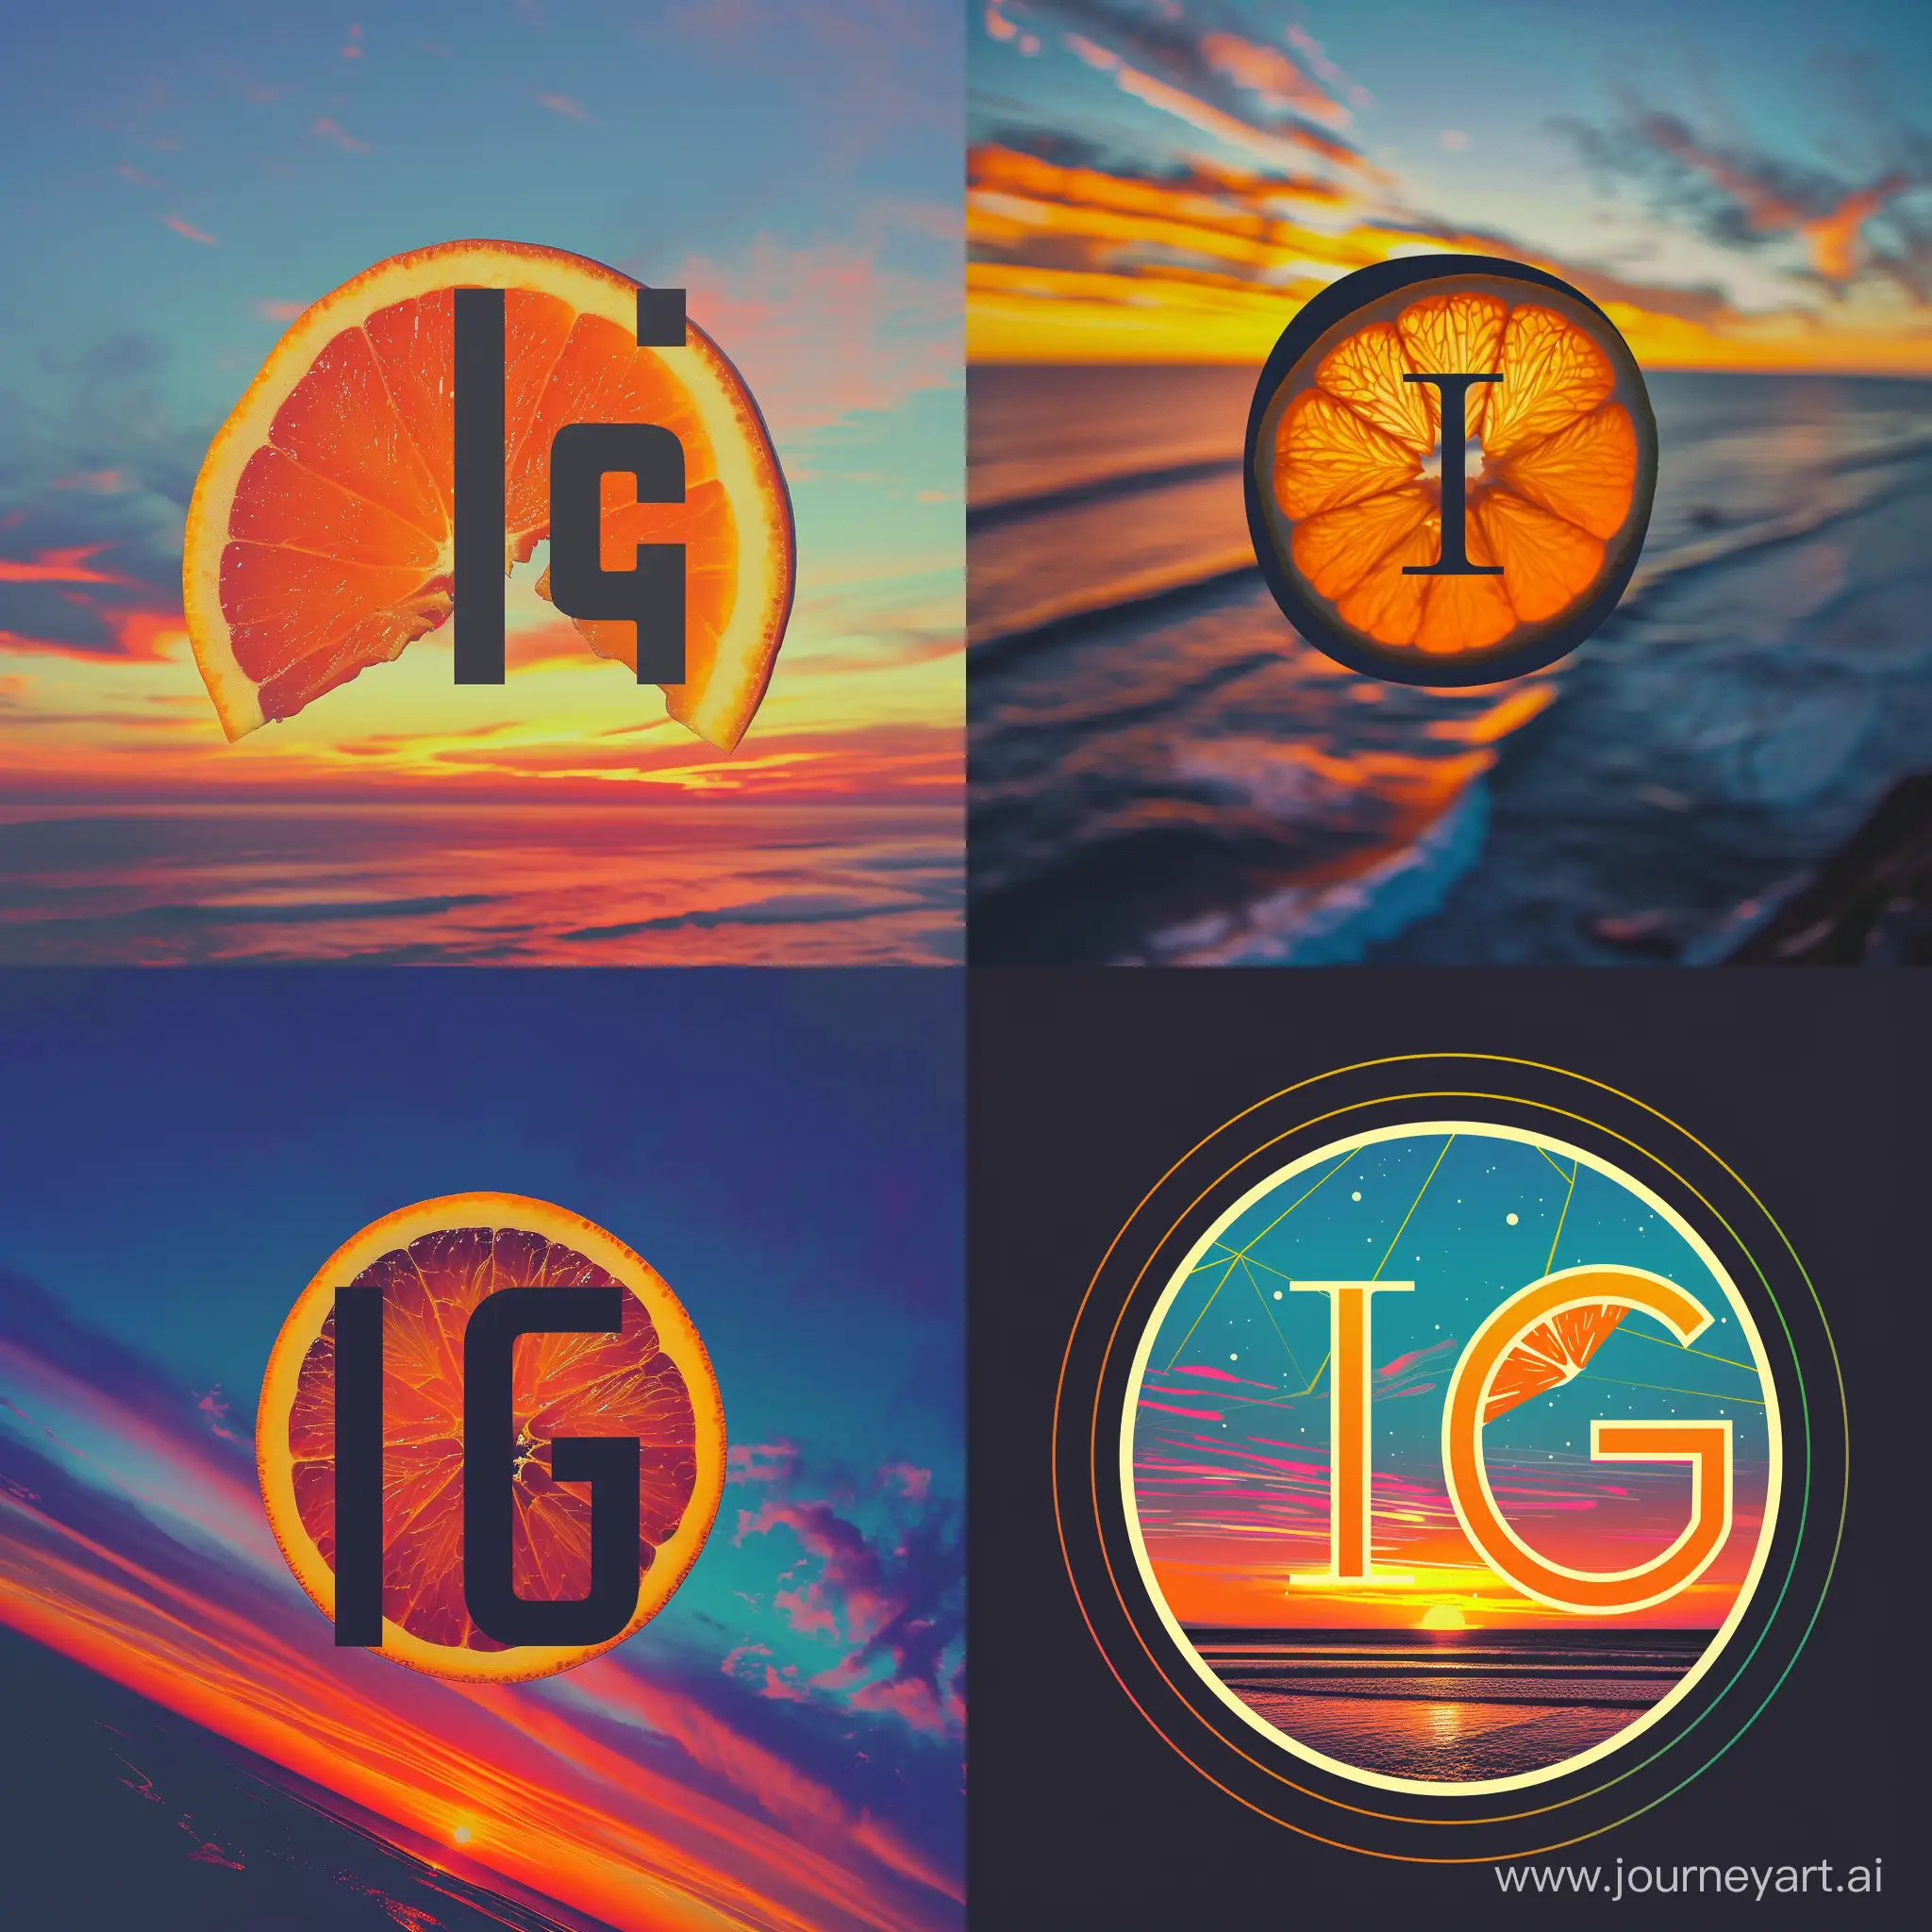 Minimalistic lettermark logo featuring "I" and "G" , Orange slice, Graphic design, Harmonic, Nutritionist, Simple, Compact camera, Fisheye lens, Sunset with vibrant colors,  N/A (Digital) --v 6 --ar 1:1 --no 61746